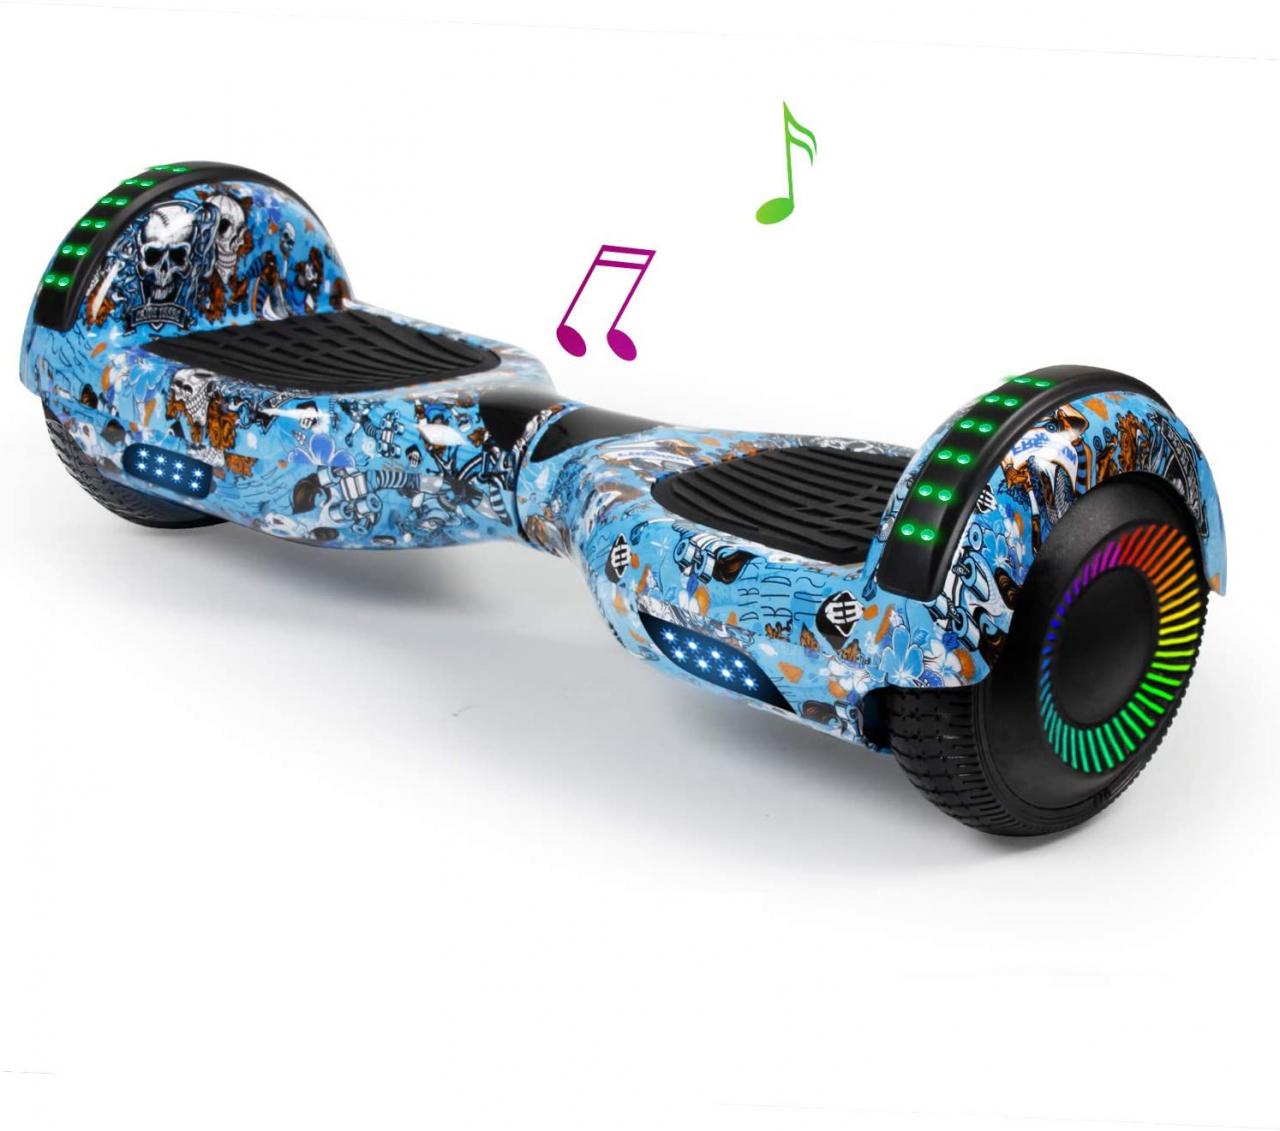 Jolege Hoverboard Review | The Self Balancing Scooters